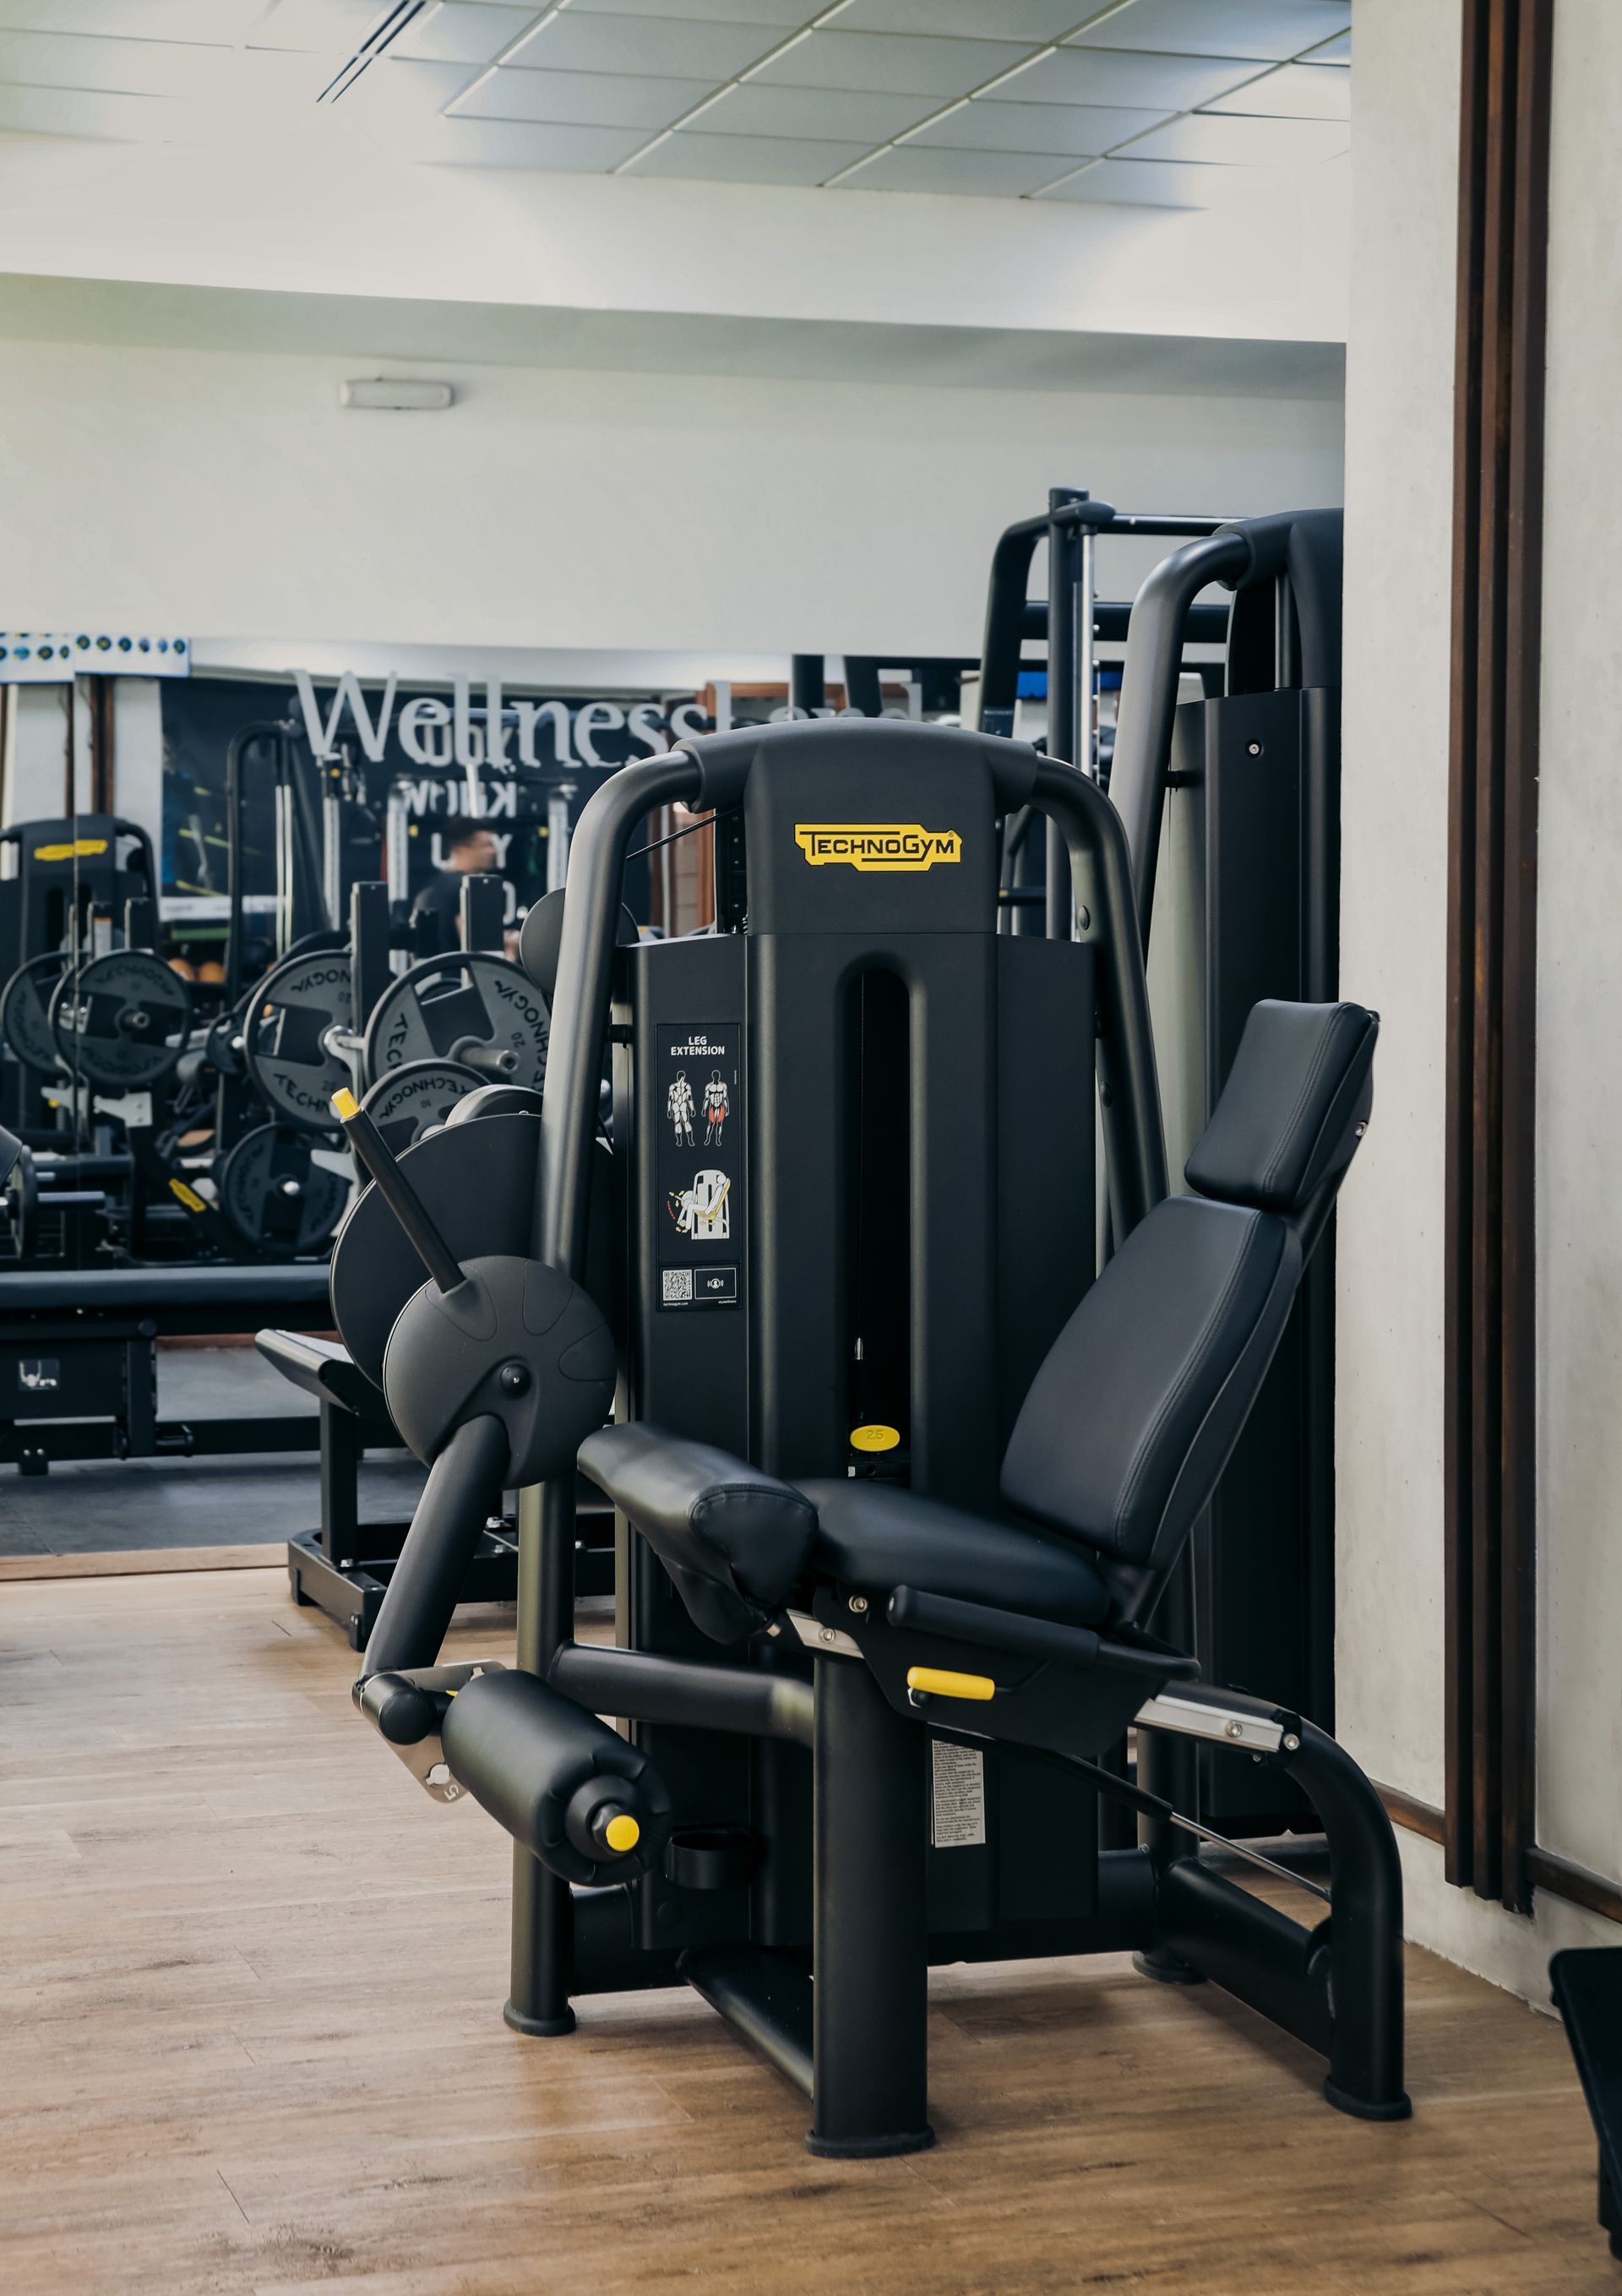 a gym with a sign that says wellness on it